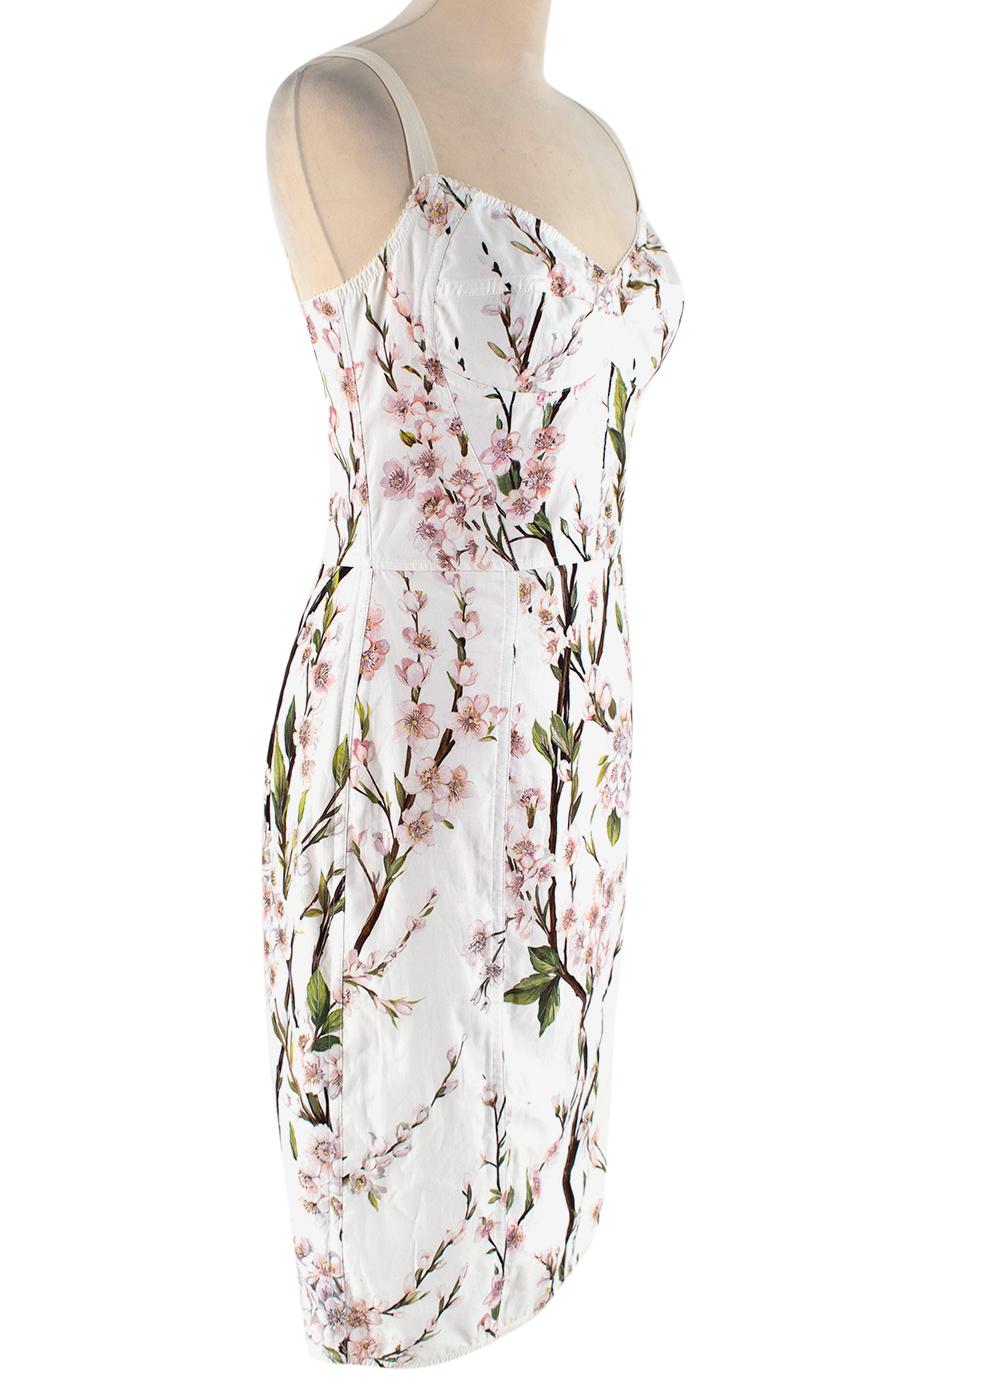 Dolce and Gabbana White Floral Bustier Dress - Size US 4 1